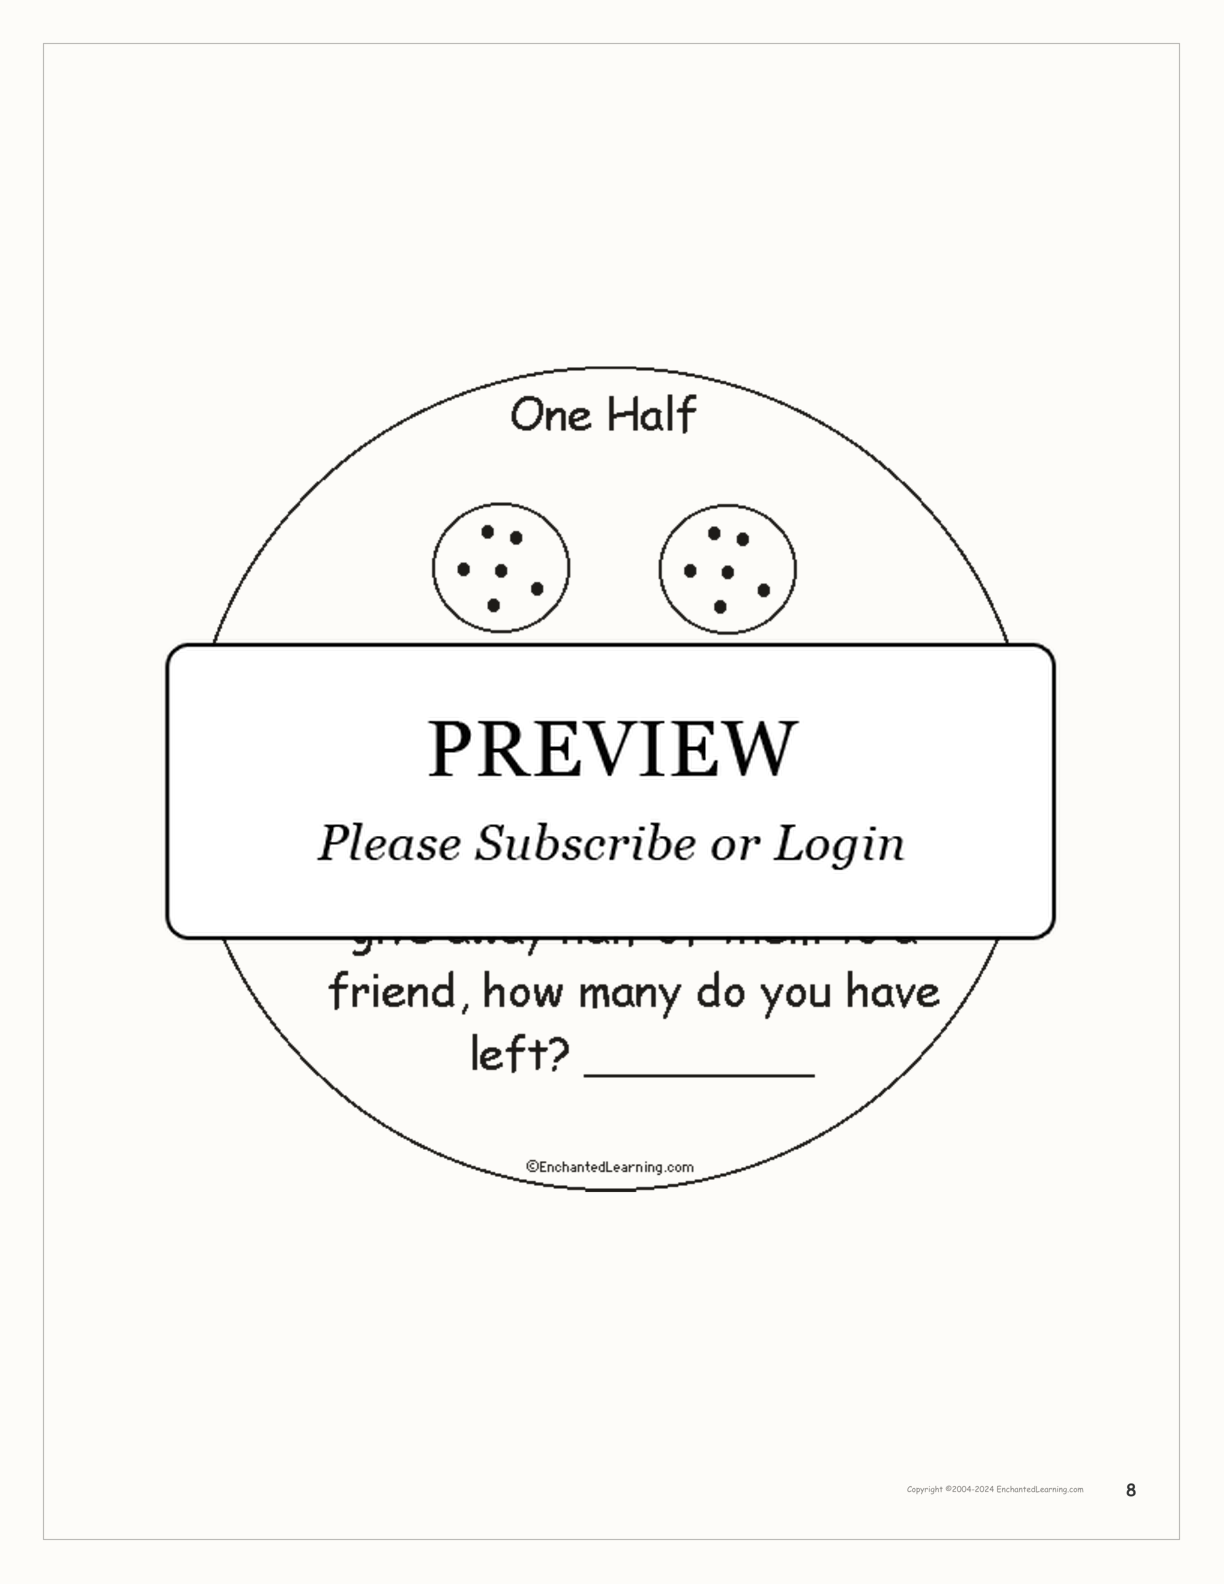 One Half: A Book on Fractions interactive printout page 8